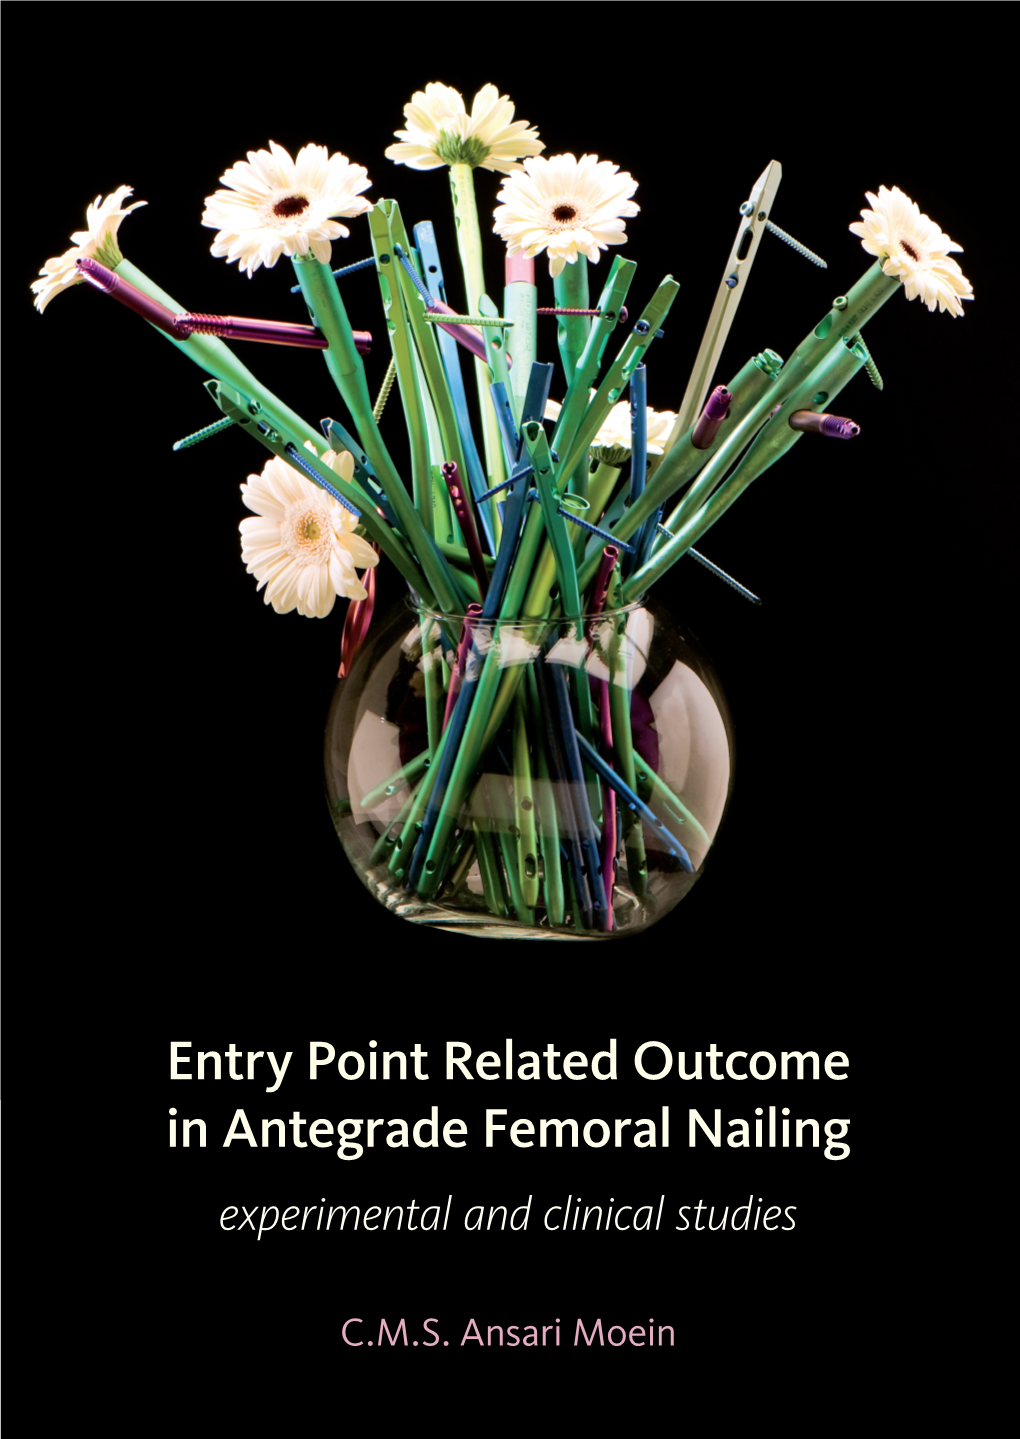 Entry Point Related Outcome in Antegrade Femoral Nailing Experimental and Clinical Studies